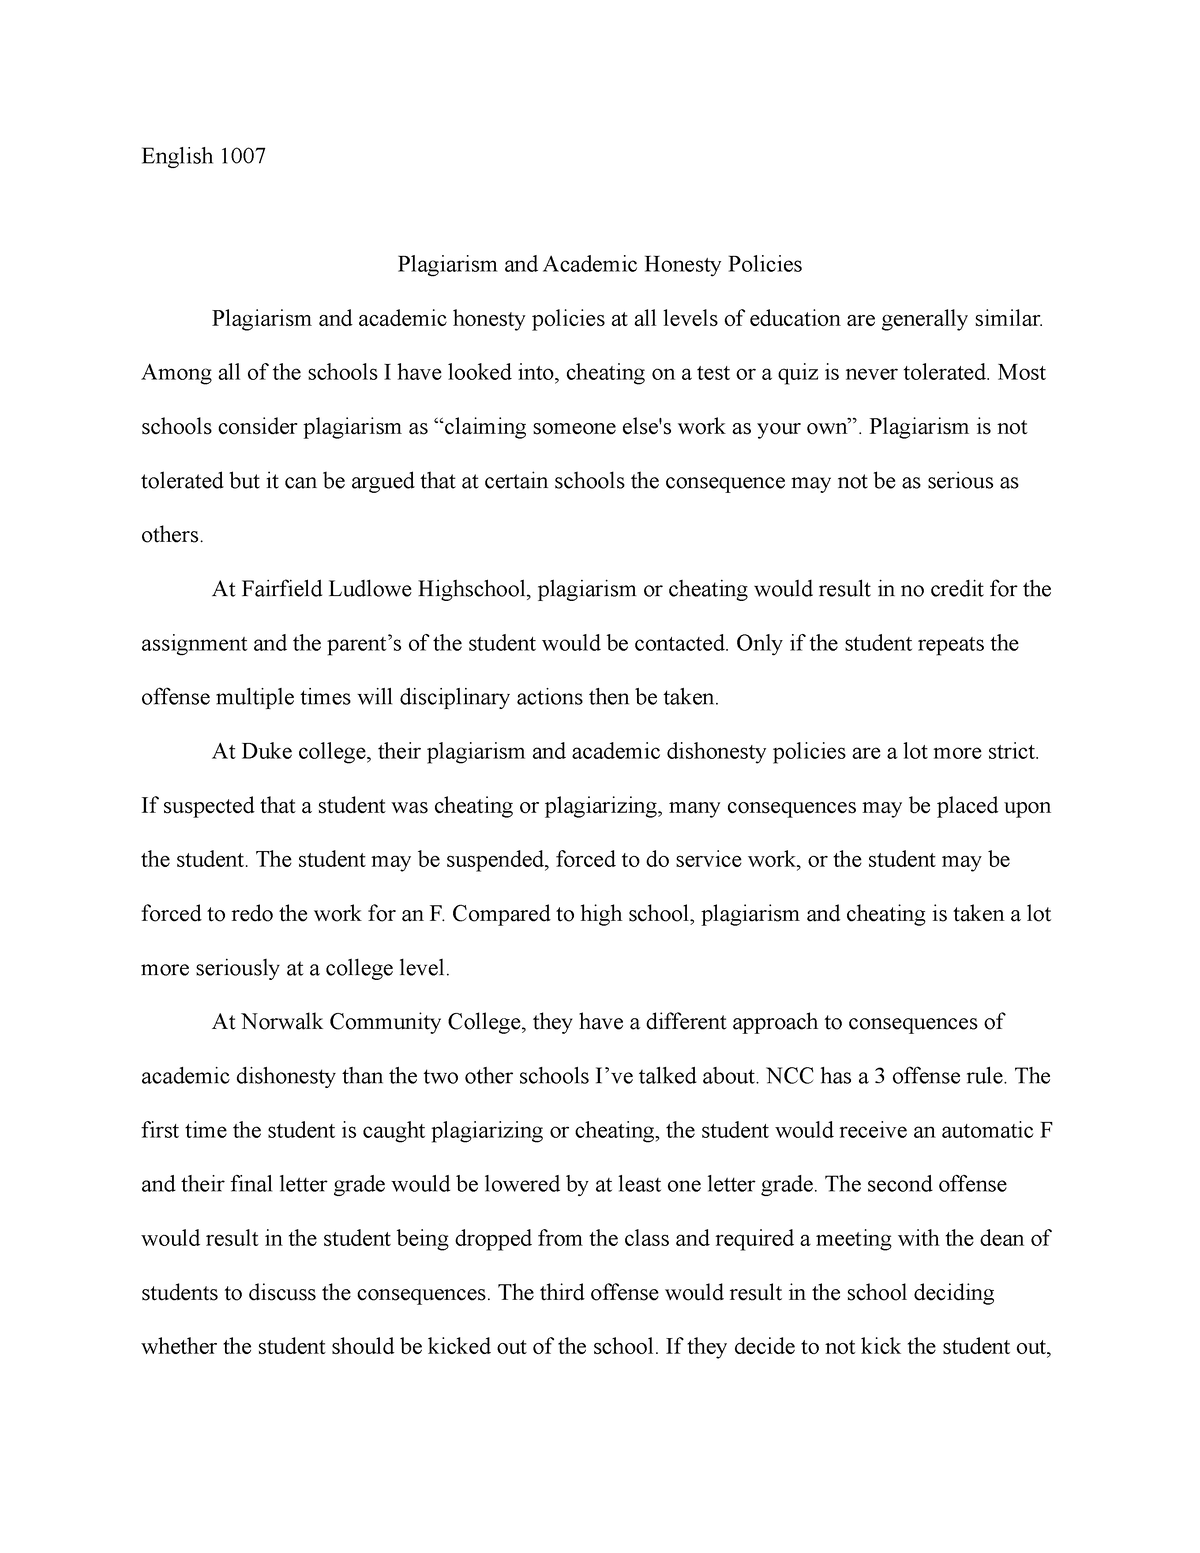 write an essay on plagiarism and academic honesty